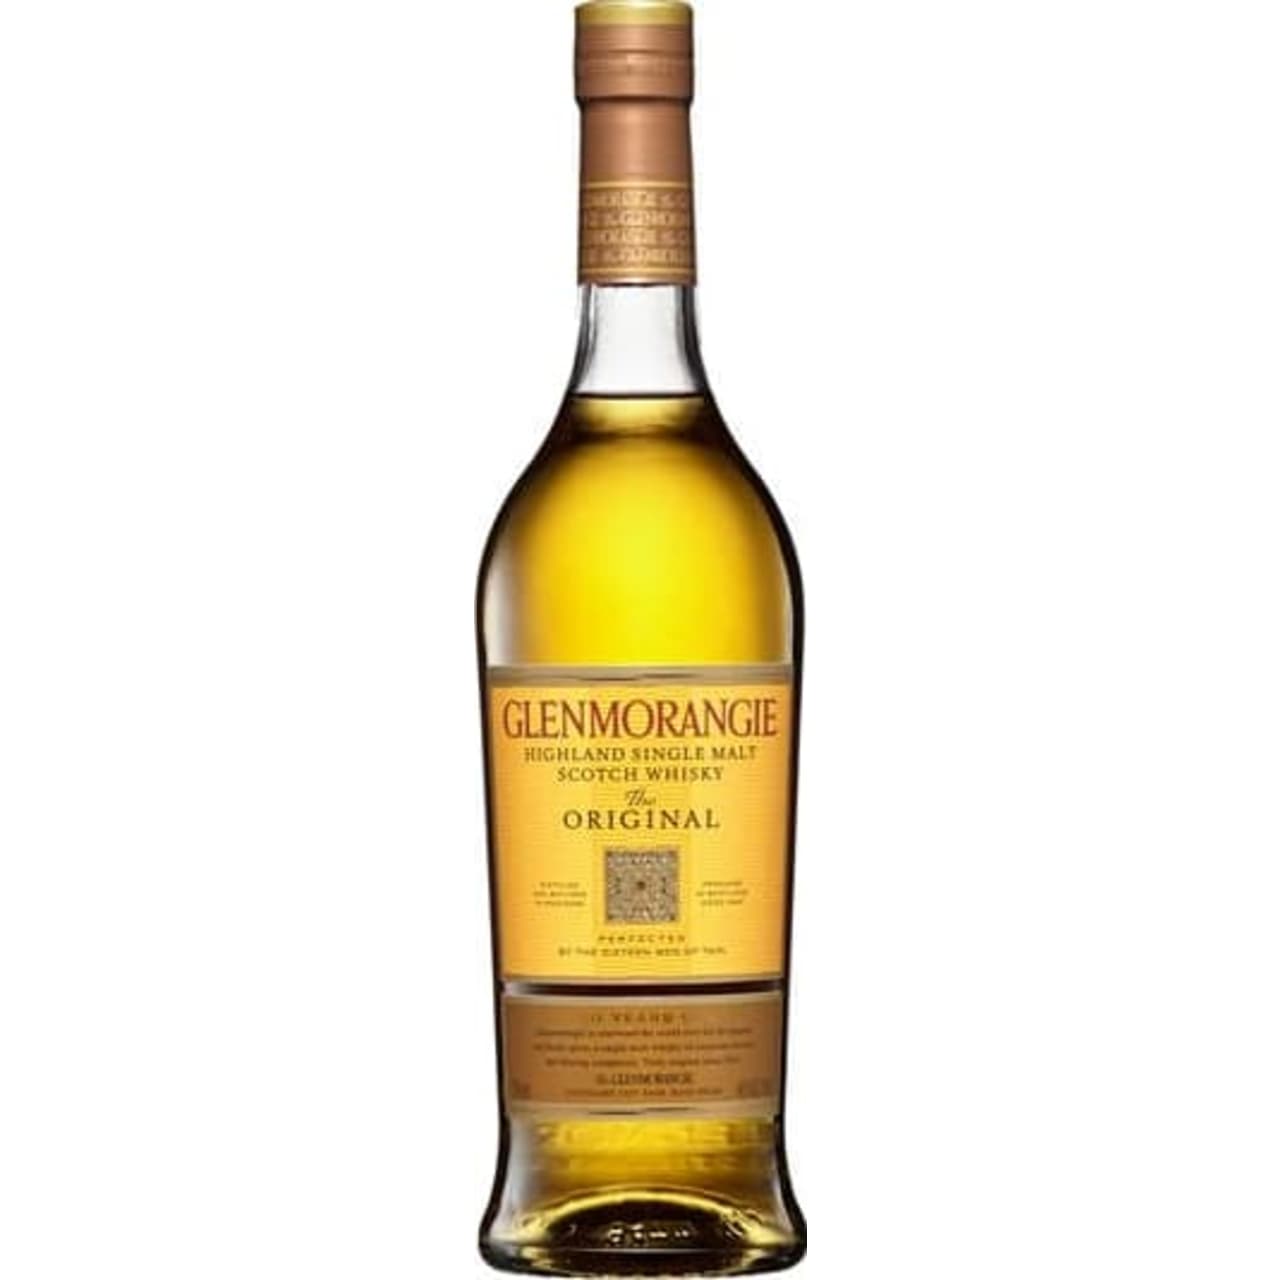 The Original is the flagship single malt whisky from the iconic Glenmorangie distillery, showcasing the signature floral style. Matured in first and second fill American white oak casks for ten years, it has long been a benchmark whisky and a go-to everyday dram for whisky enthusiasts.